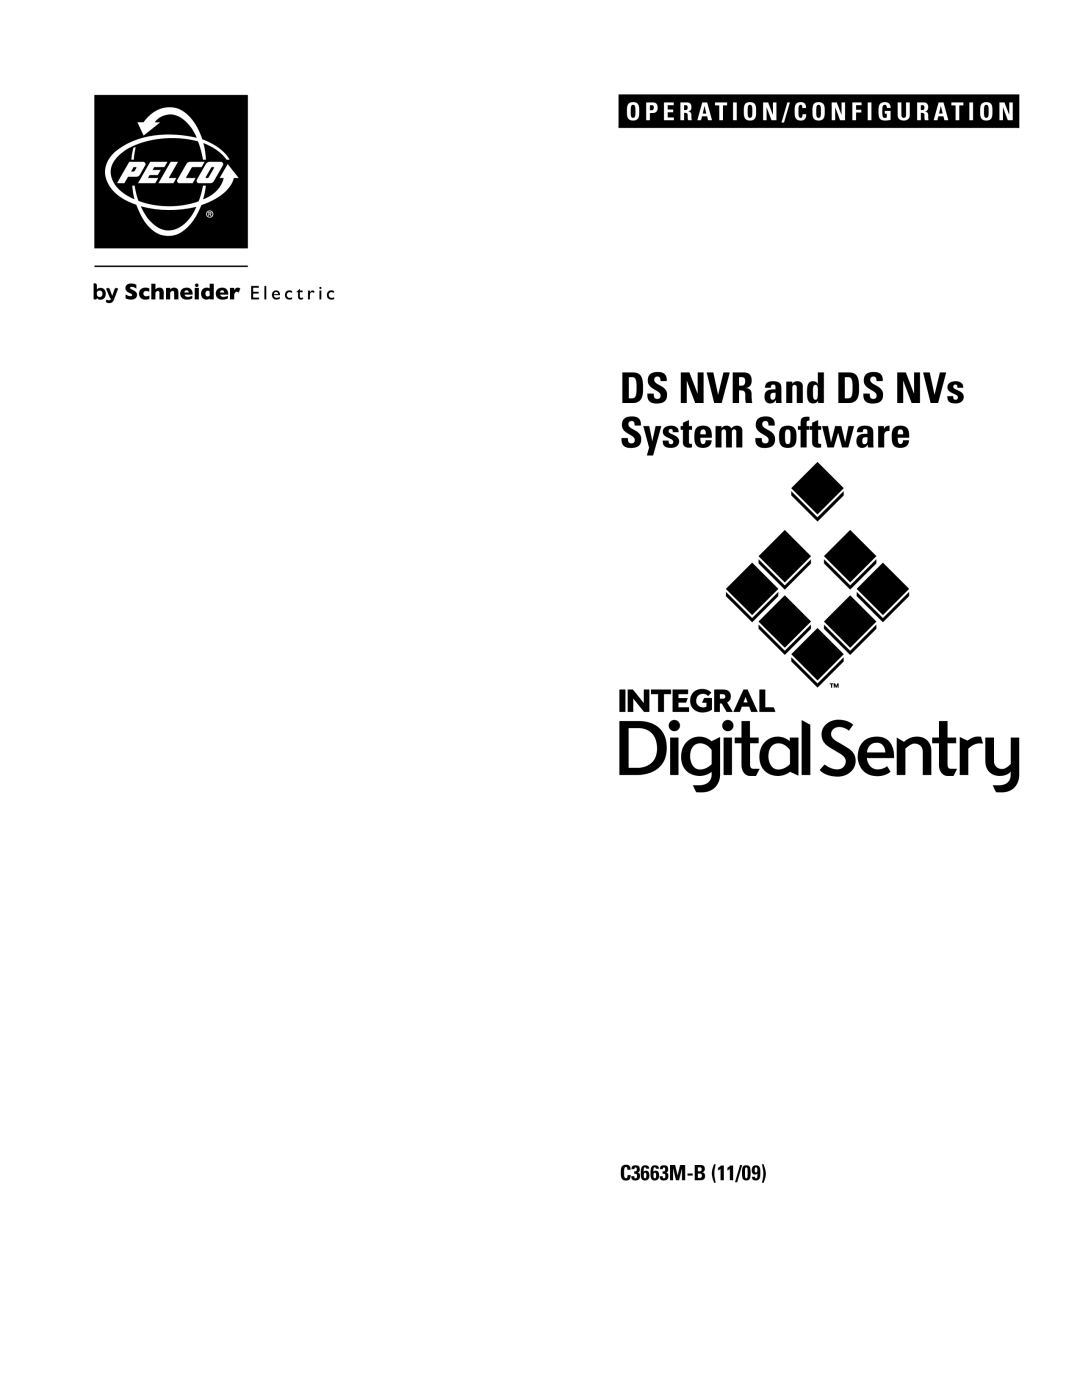 Pelco DS NVS manual C3663M-B11/09, DS NVR and DS NVs System Software, O P E R A T I O N / C O N F I G U R A T I O N 